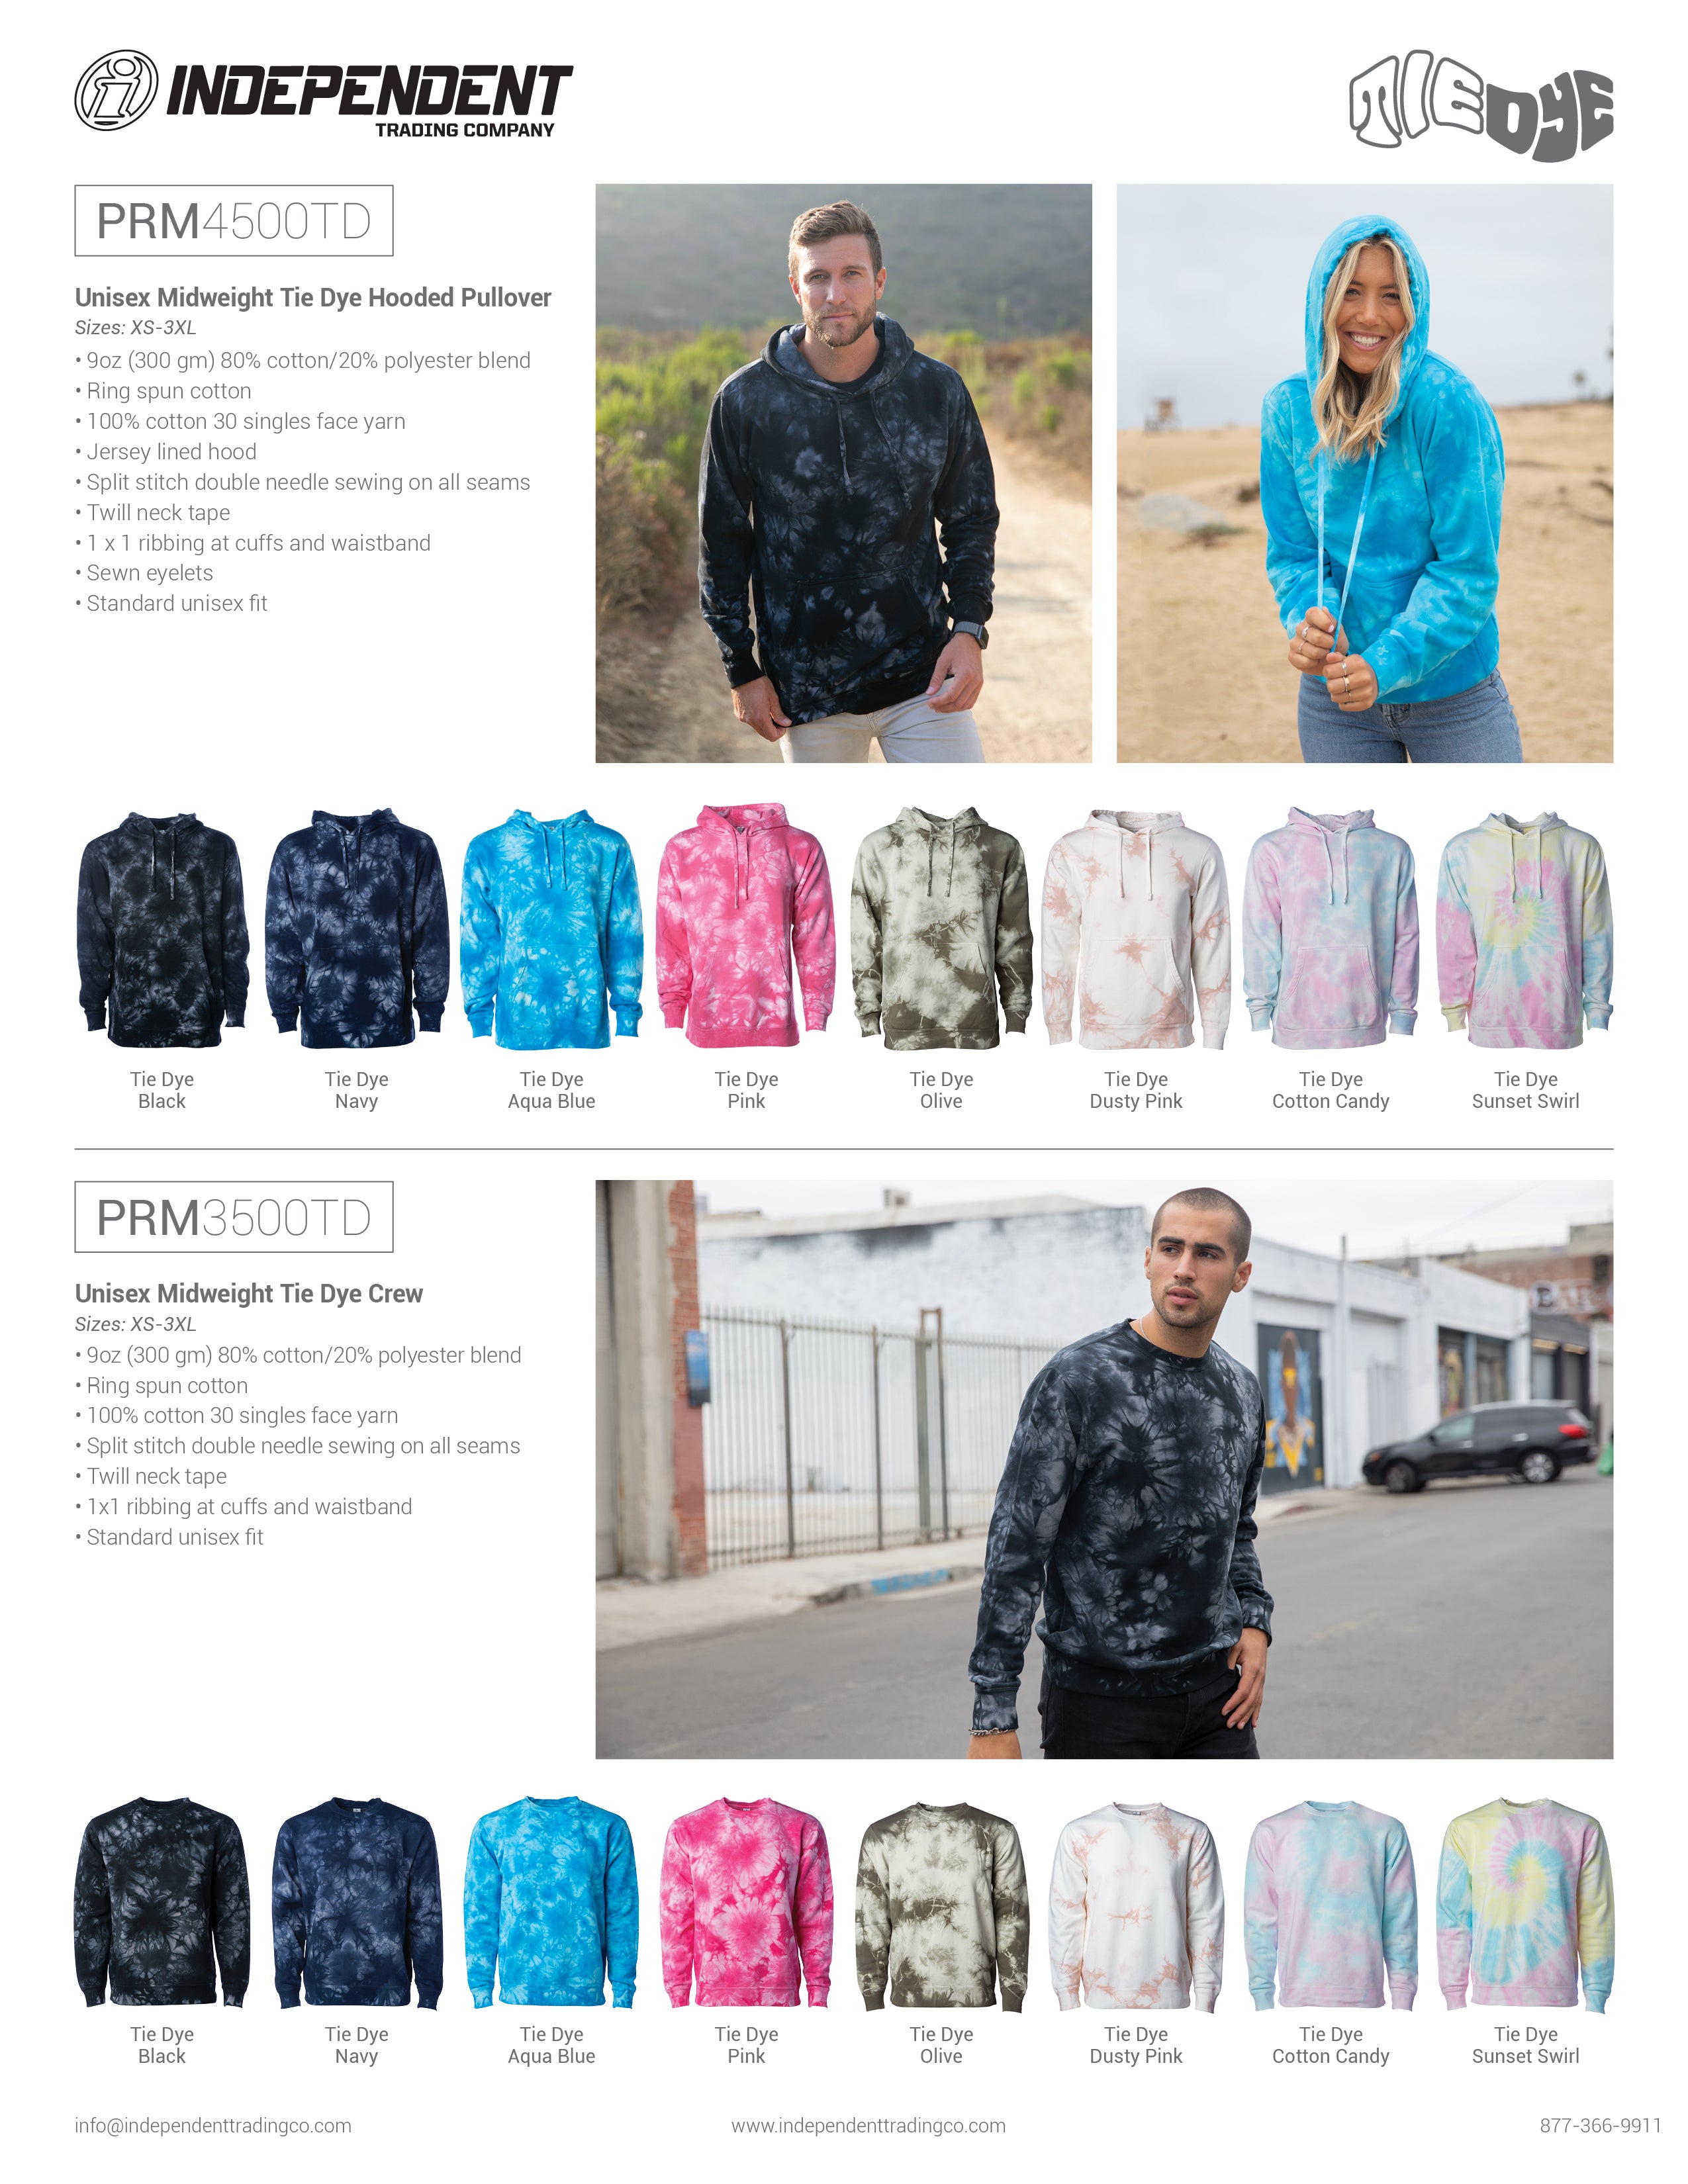 PRM4500TD & PRM3500TD Unisex Midweight Tie Dye Pullover and Crew